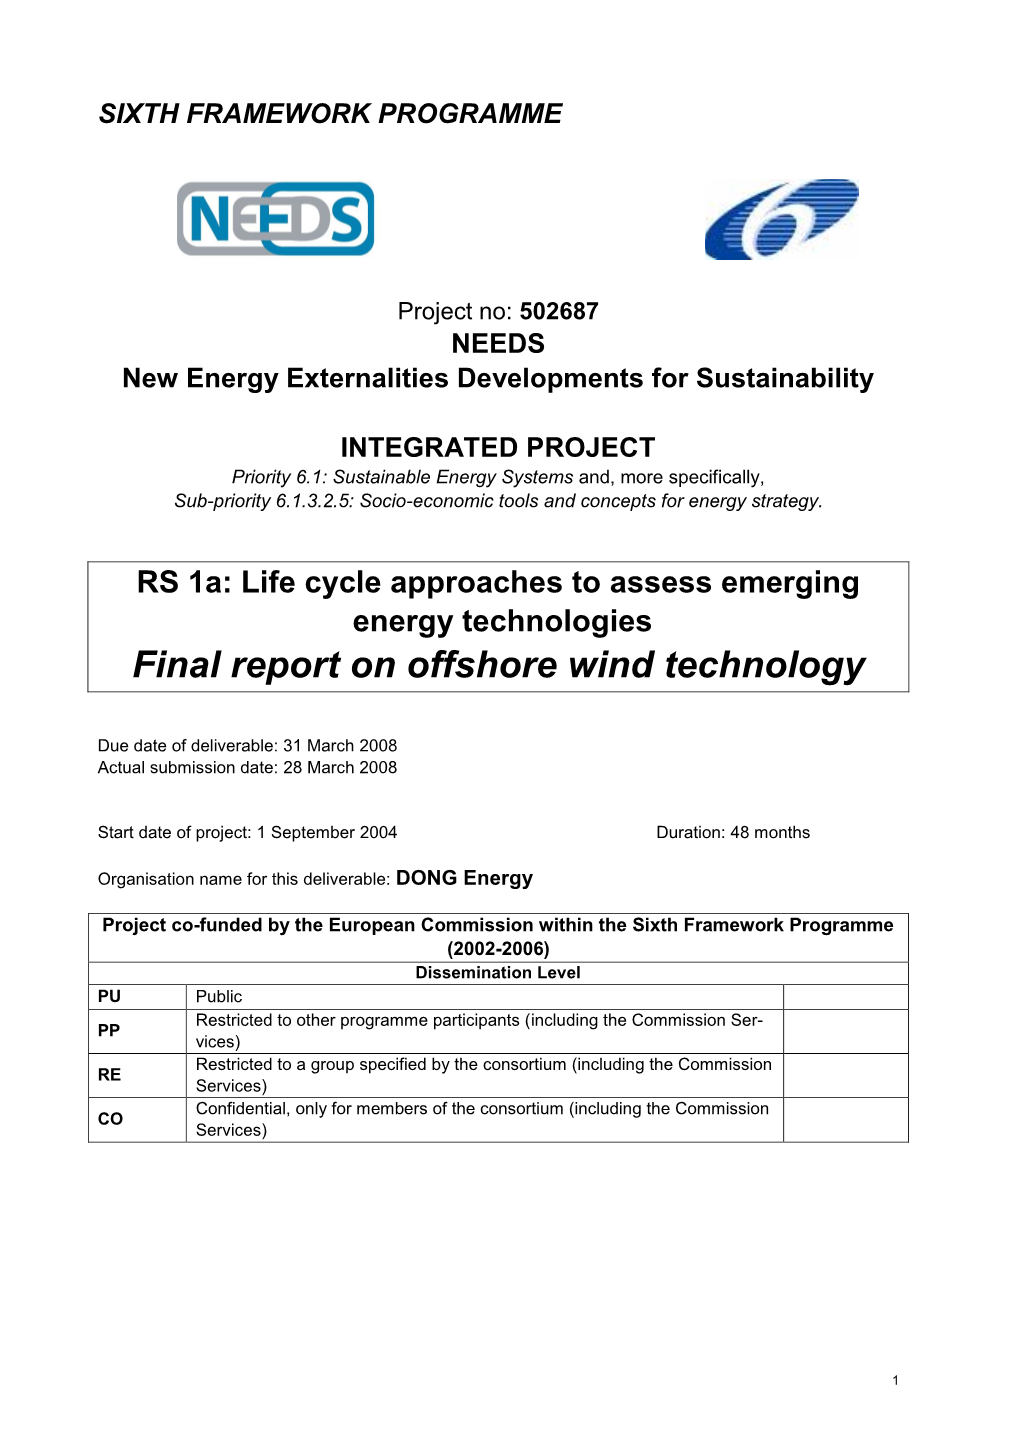 Life Cycle Approaces to Assess Emerging Energy Technologies